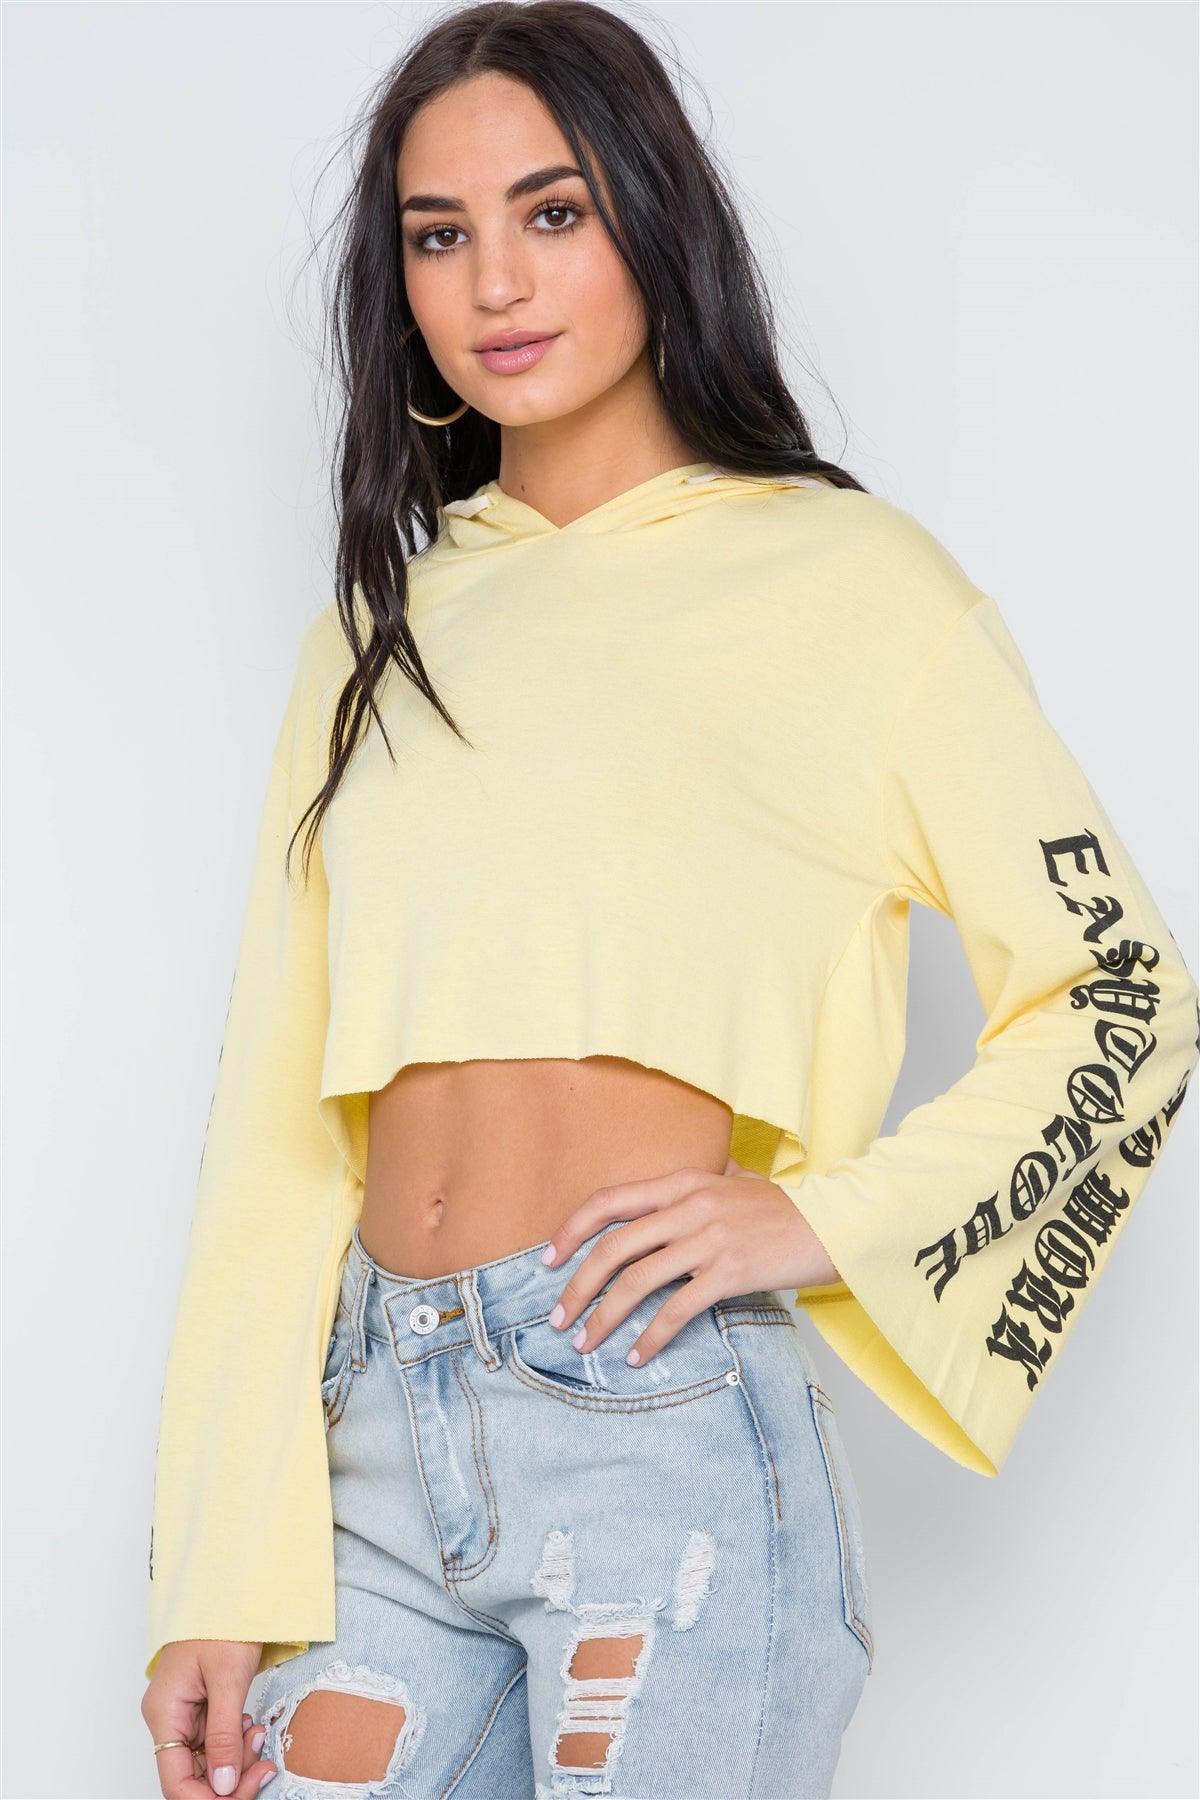 Yellow Graphic Print Long Sleeves Hooded Crop Top /2-2-2